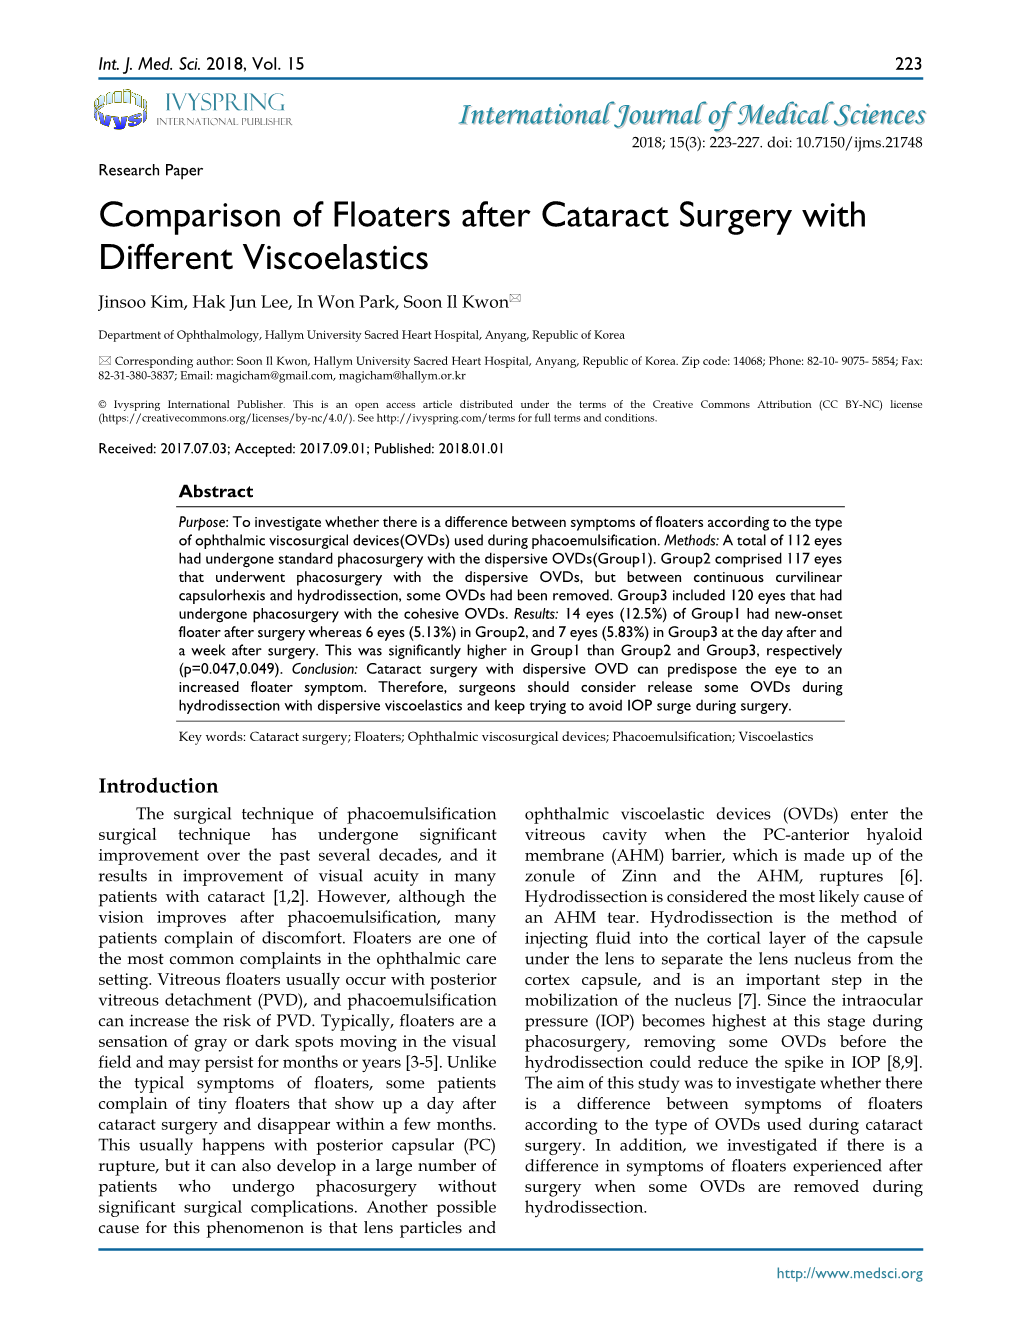 Comparison of Floaters After Cataract Surgery with Different Viscoelastics Jinsoo Kim, Hak Jun Lee, in Won Park, Soon Il Kwon